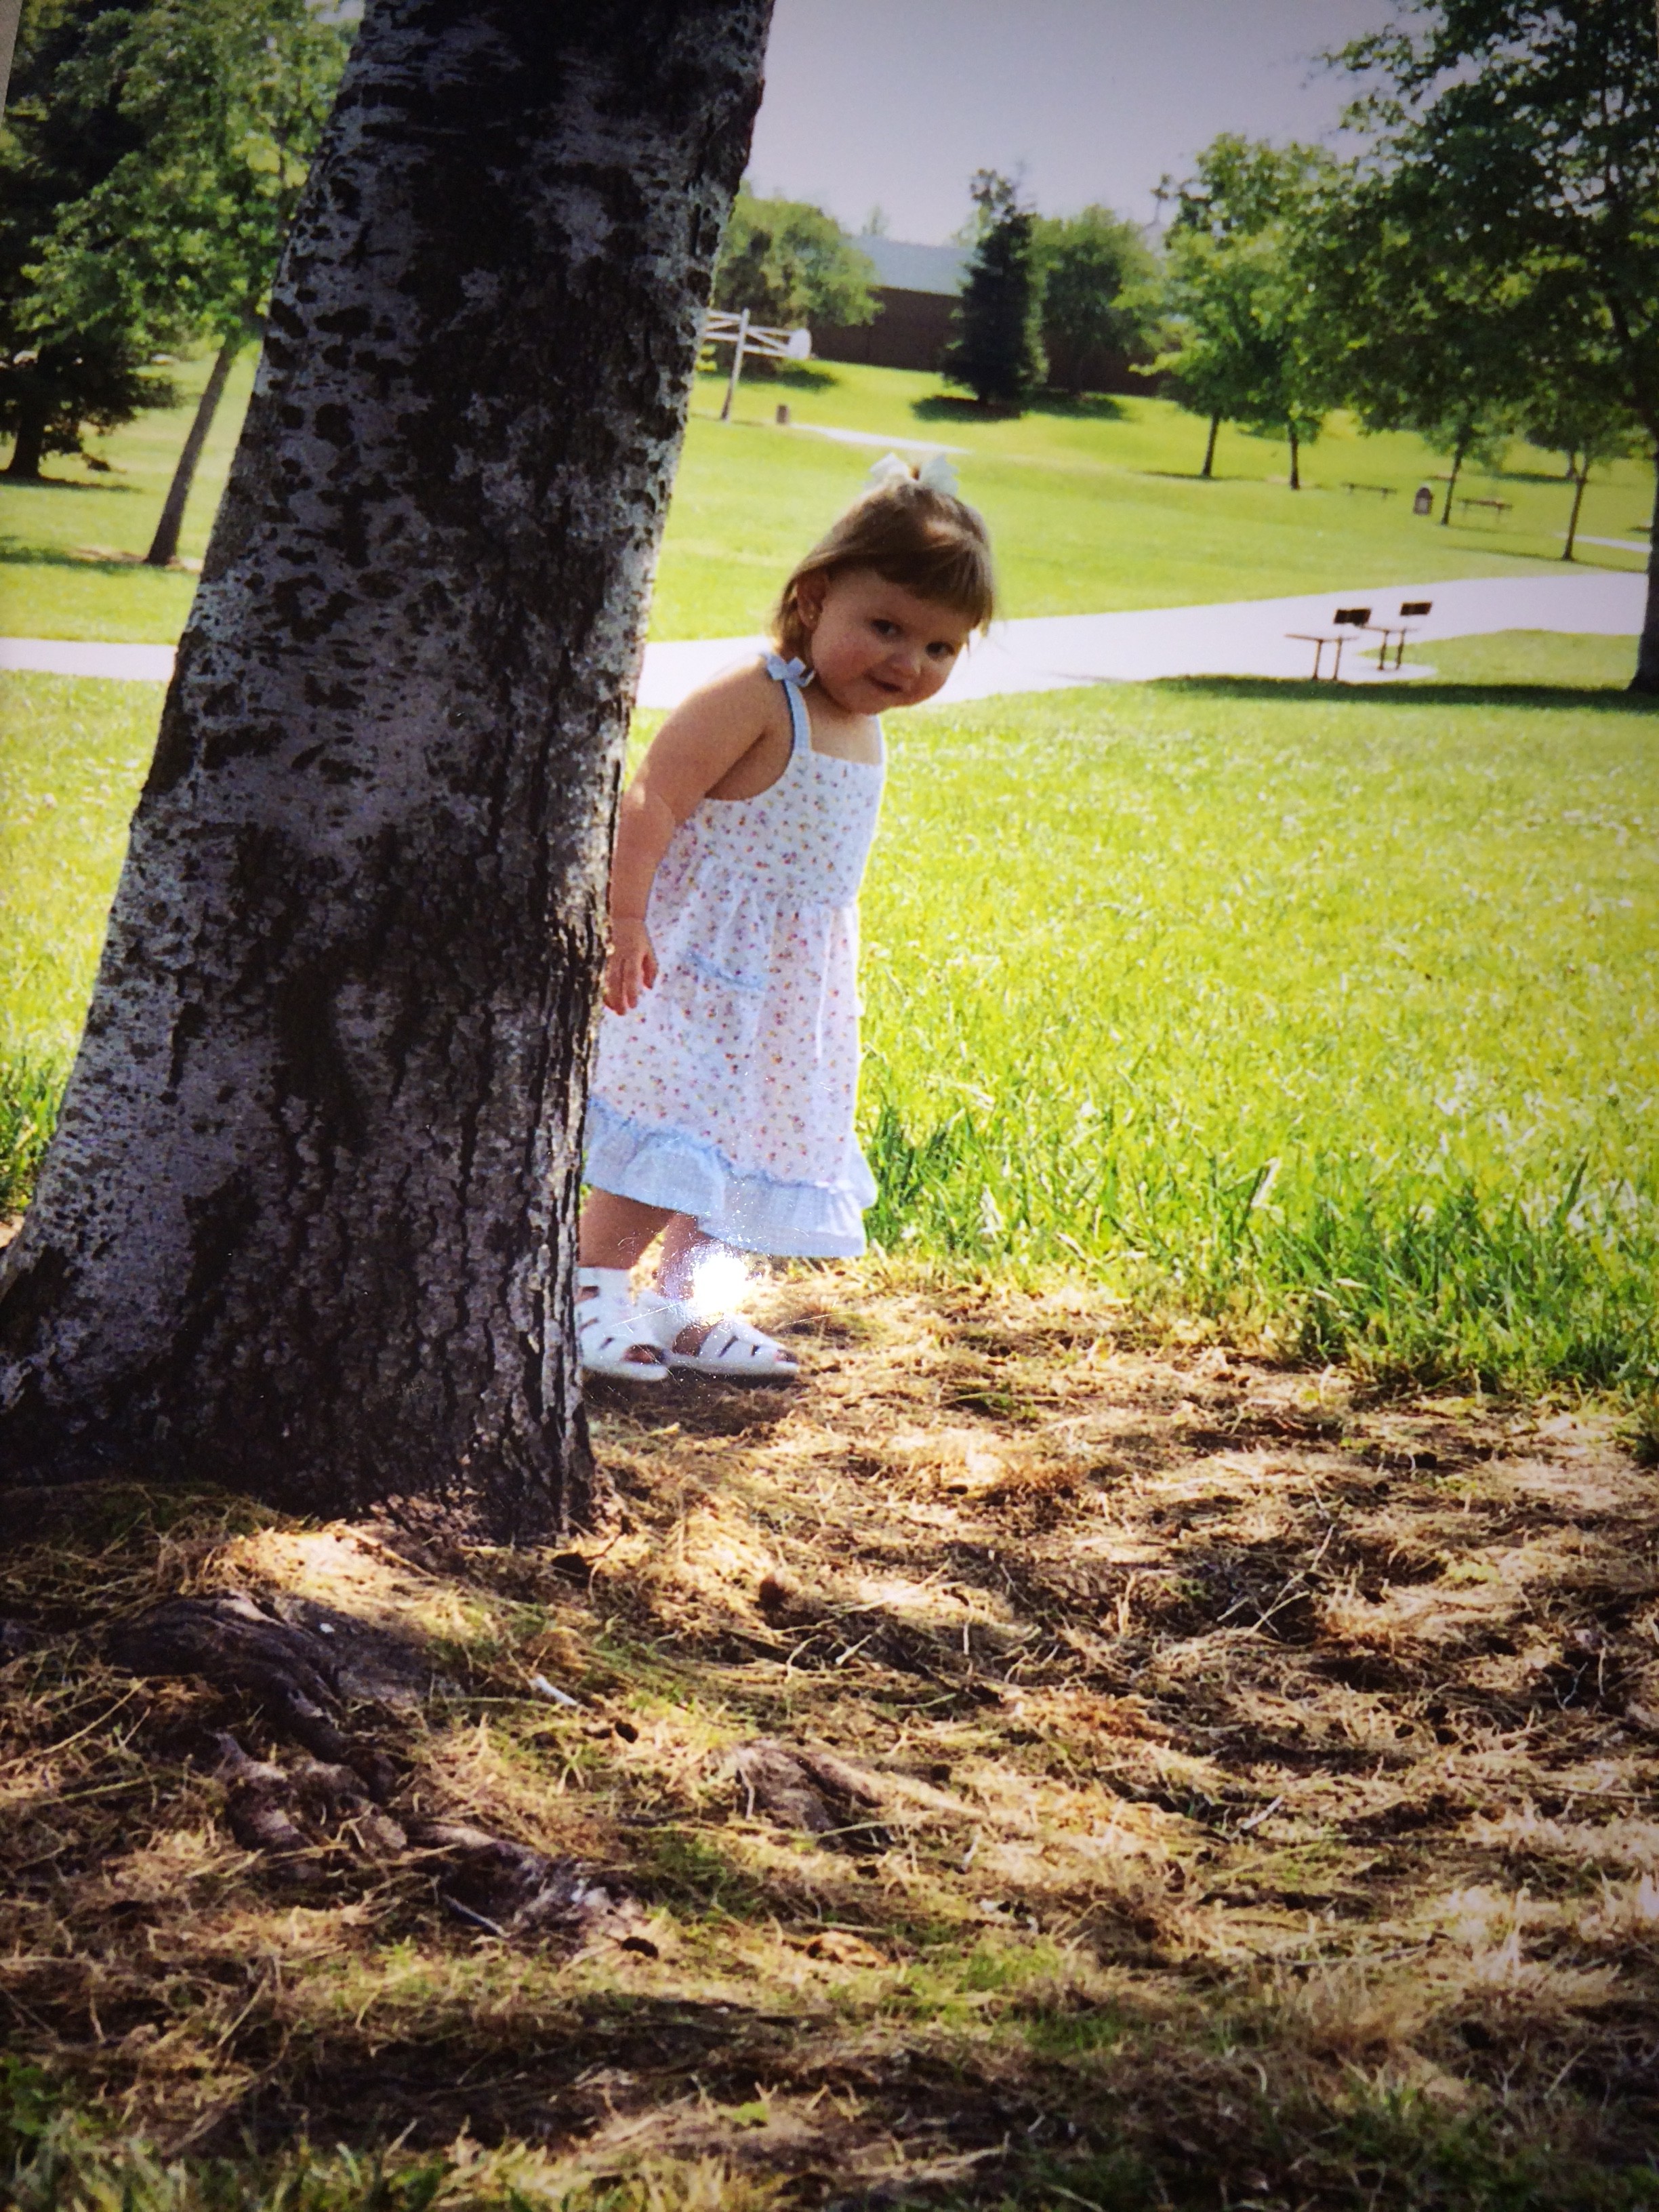 Peek-a-boo! (My daughter, about 10 years ago.)